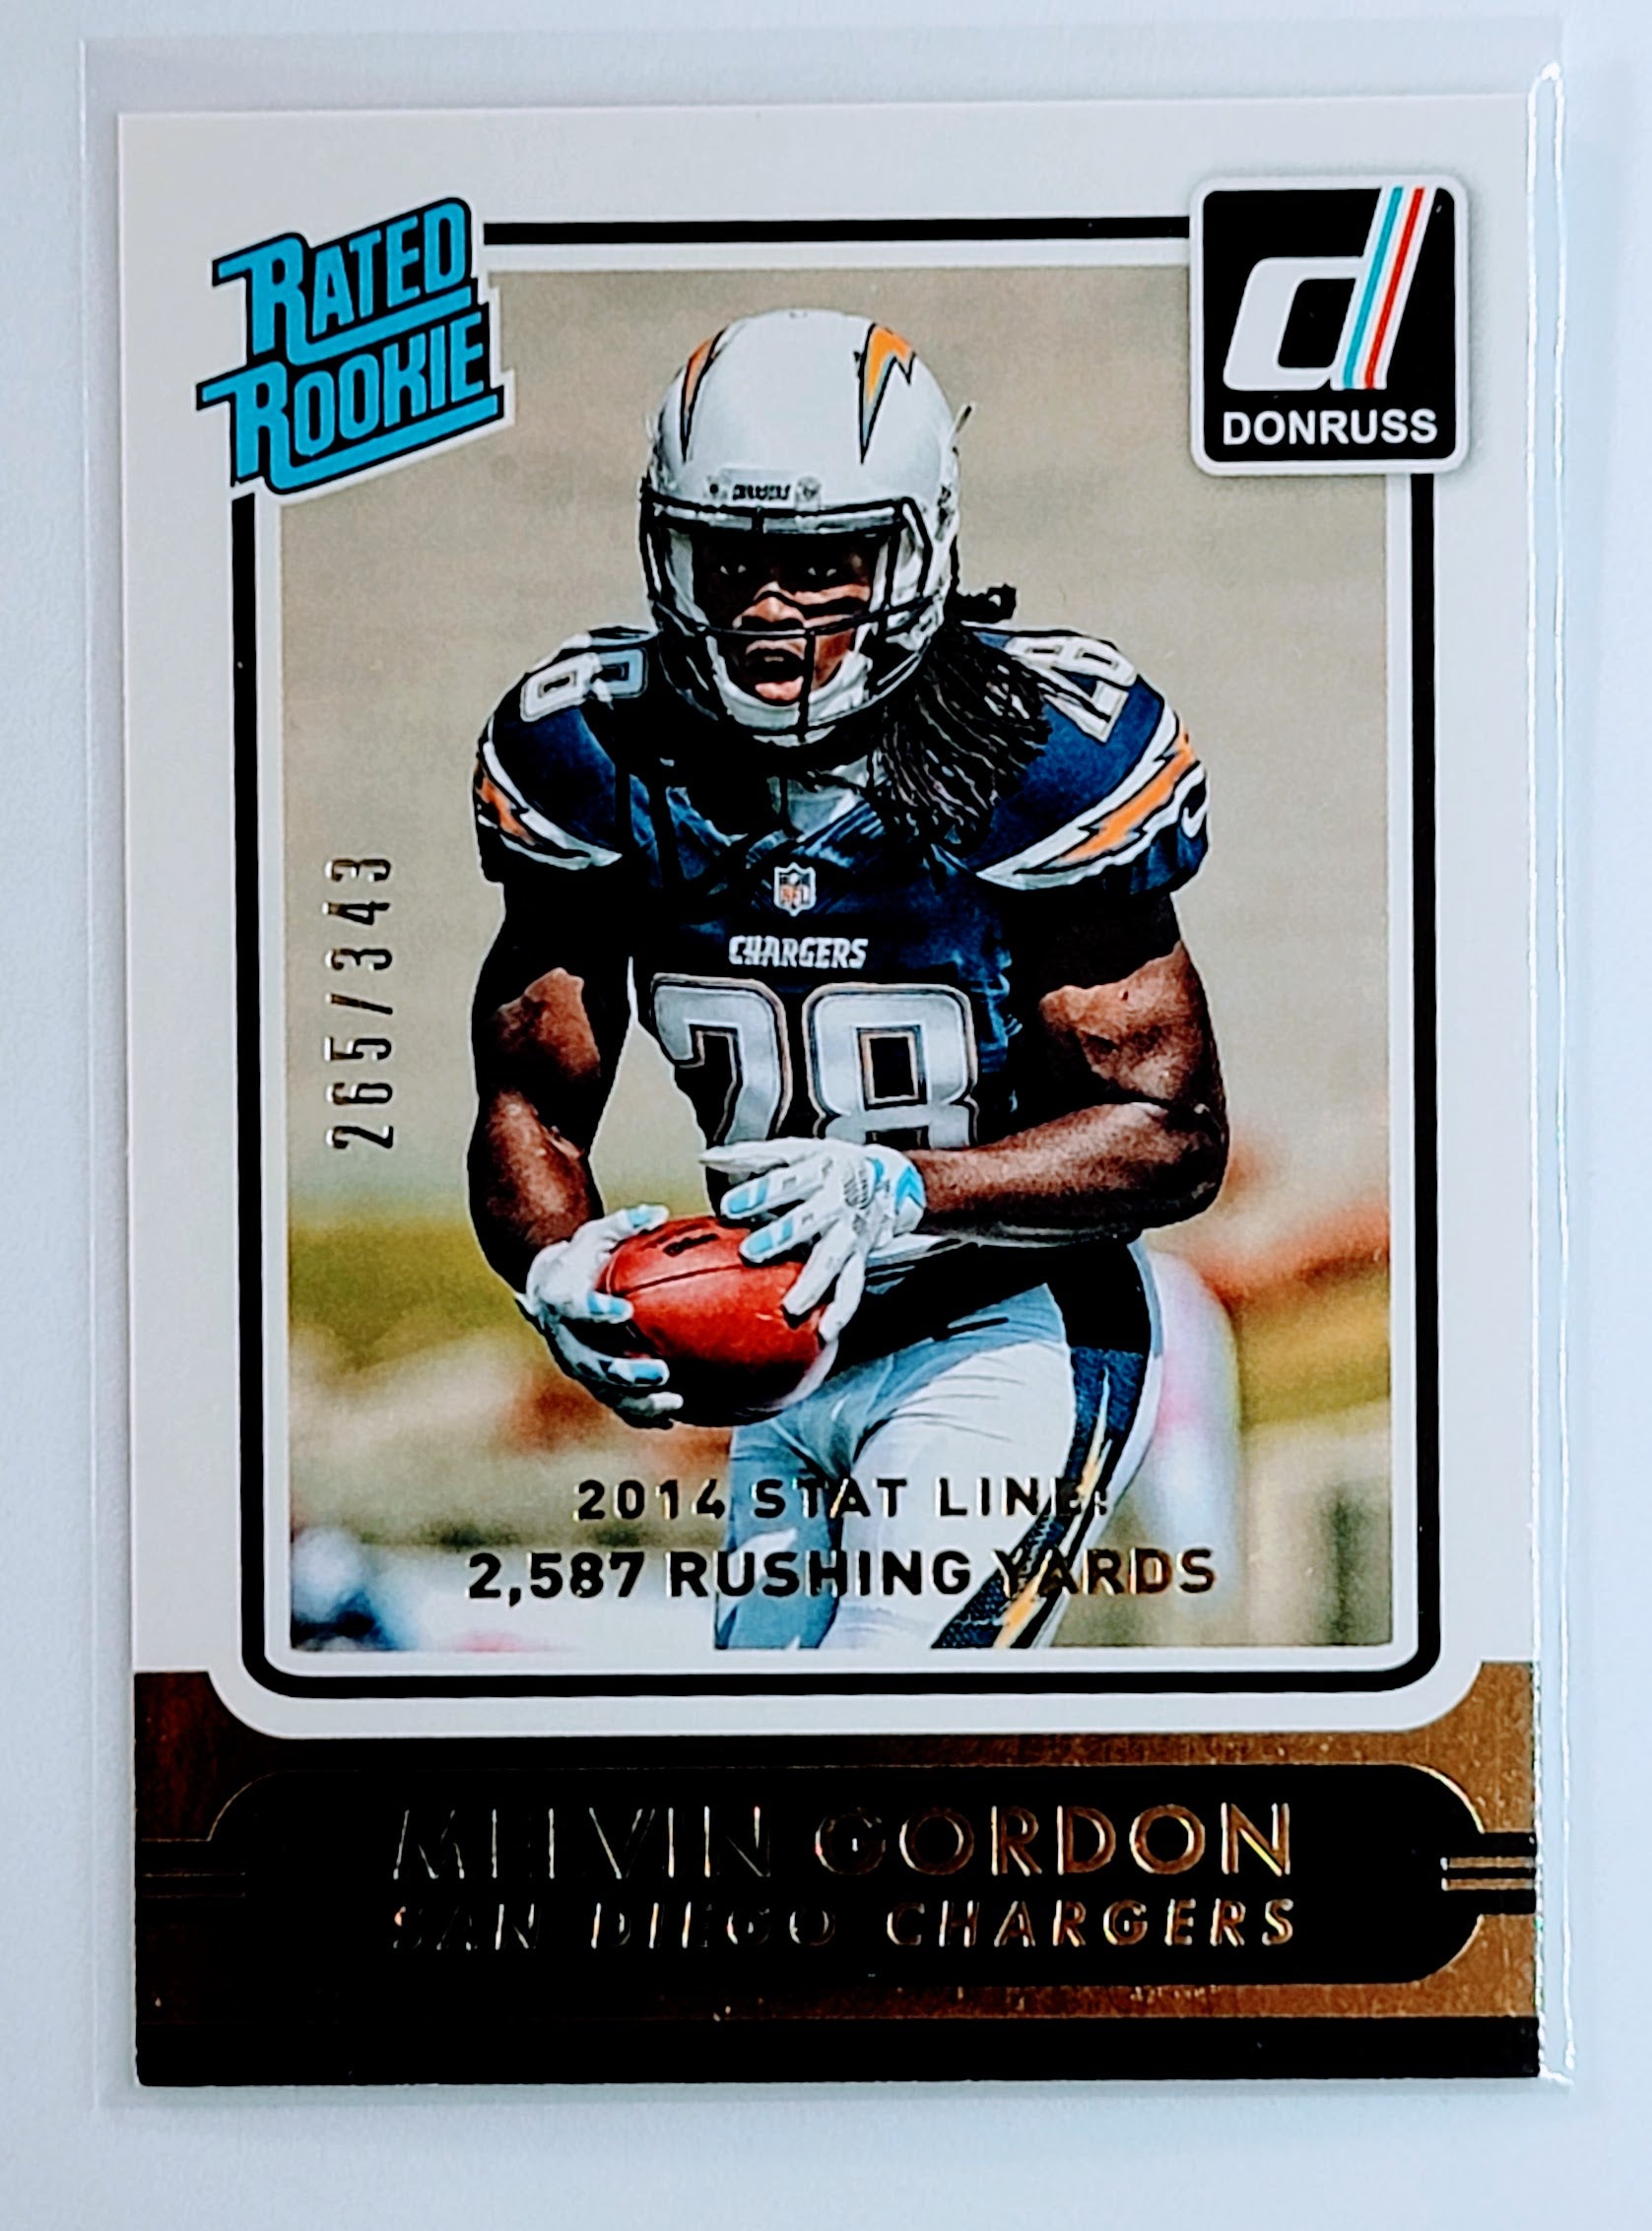 2015 Donruss Melvin
Gordon RR, RC San Diego Chargers
  Football Card TH1C4 simple Xclusive Collectibles   